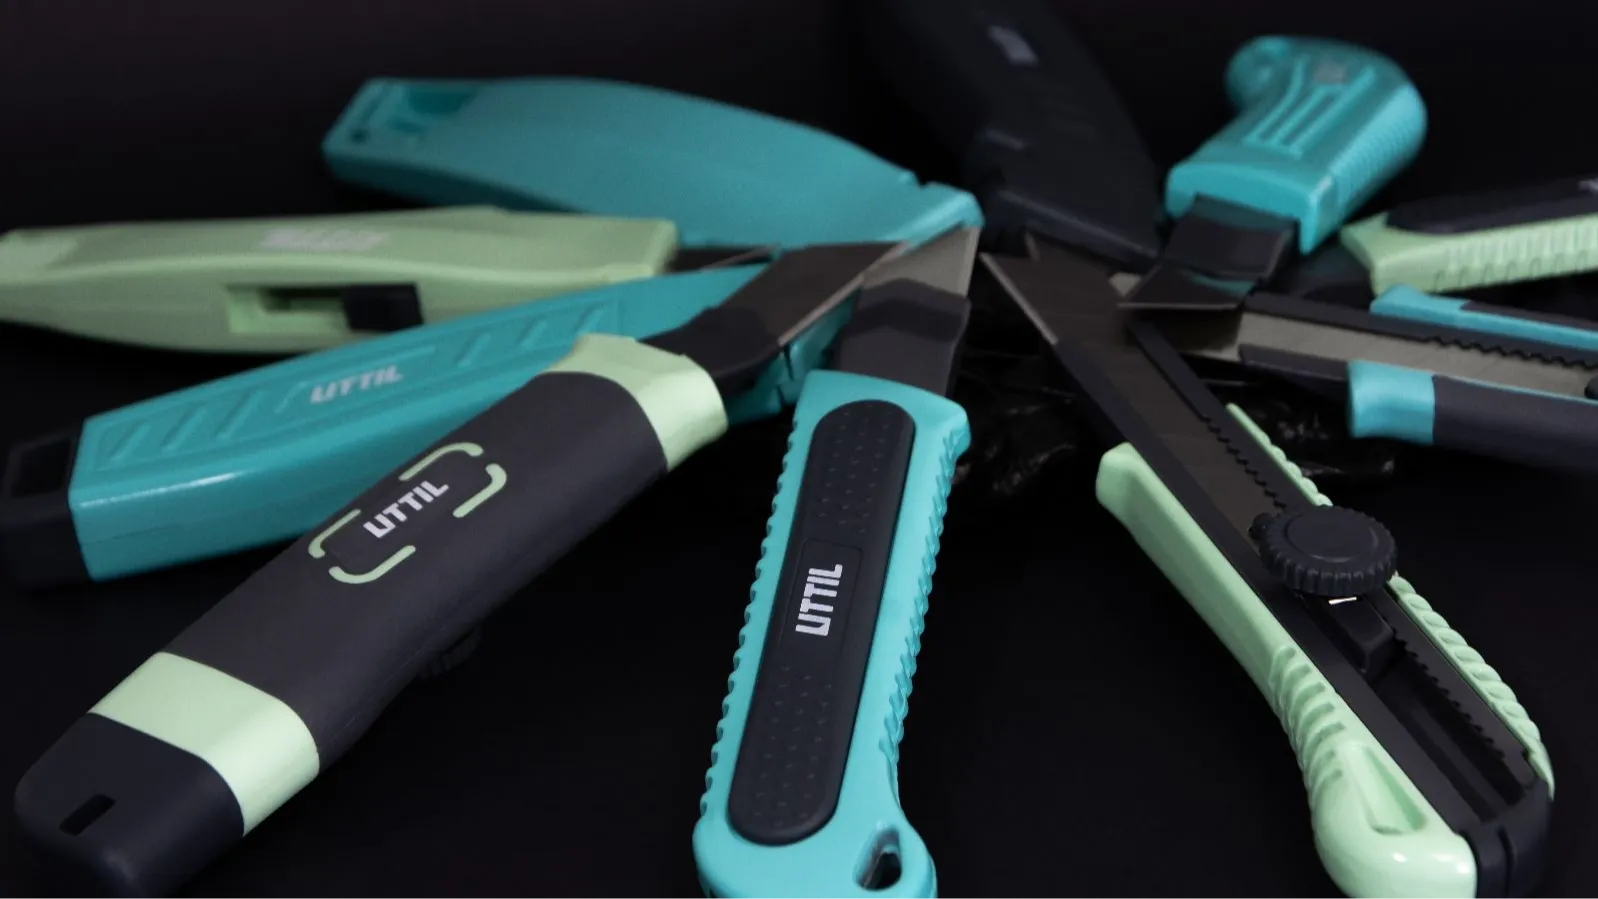 types and models of utility knives by uttil brand